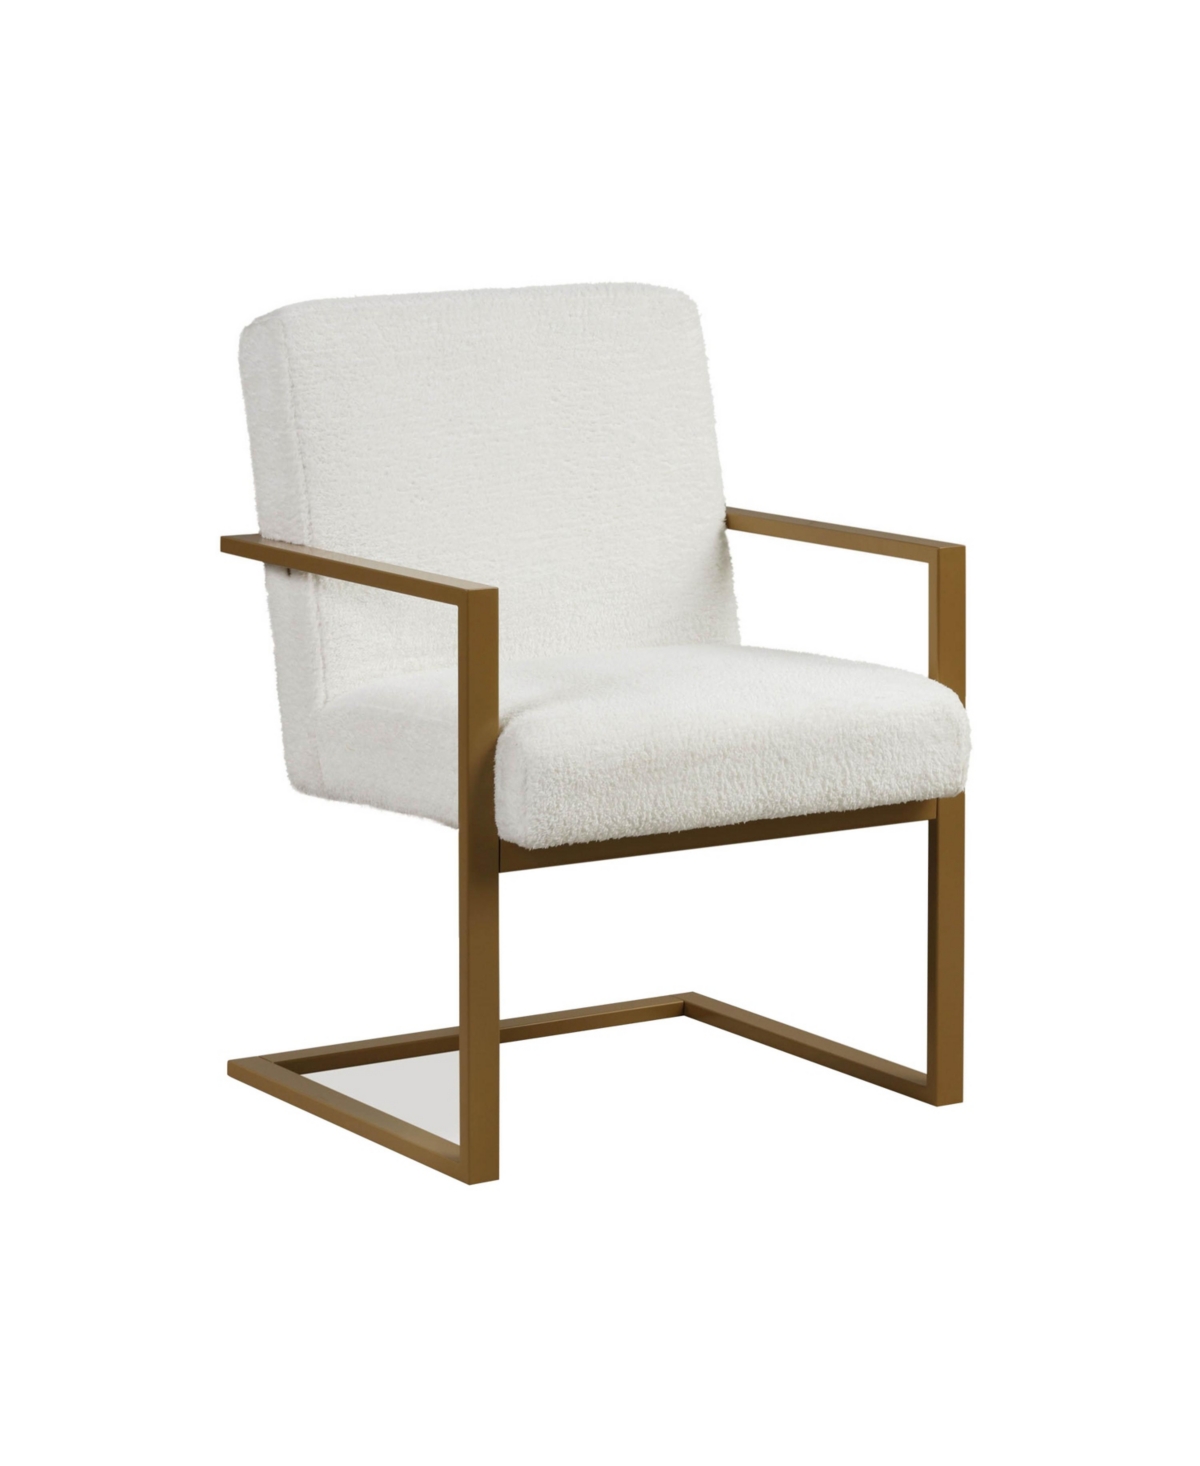 Lifestyle Solutions 34.8" Wood, Steel, Foam And Polyester Dominic Accent Chair In Cream/gold